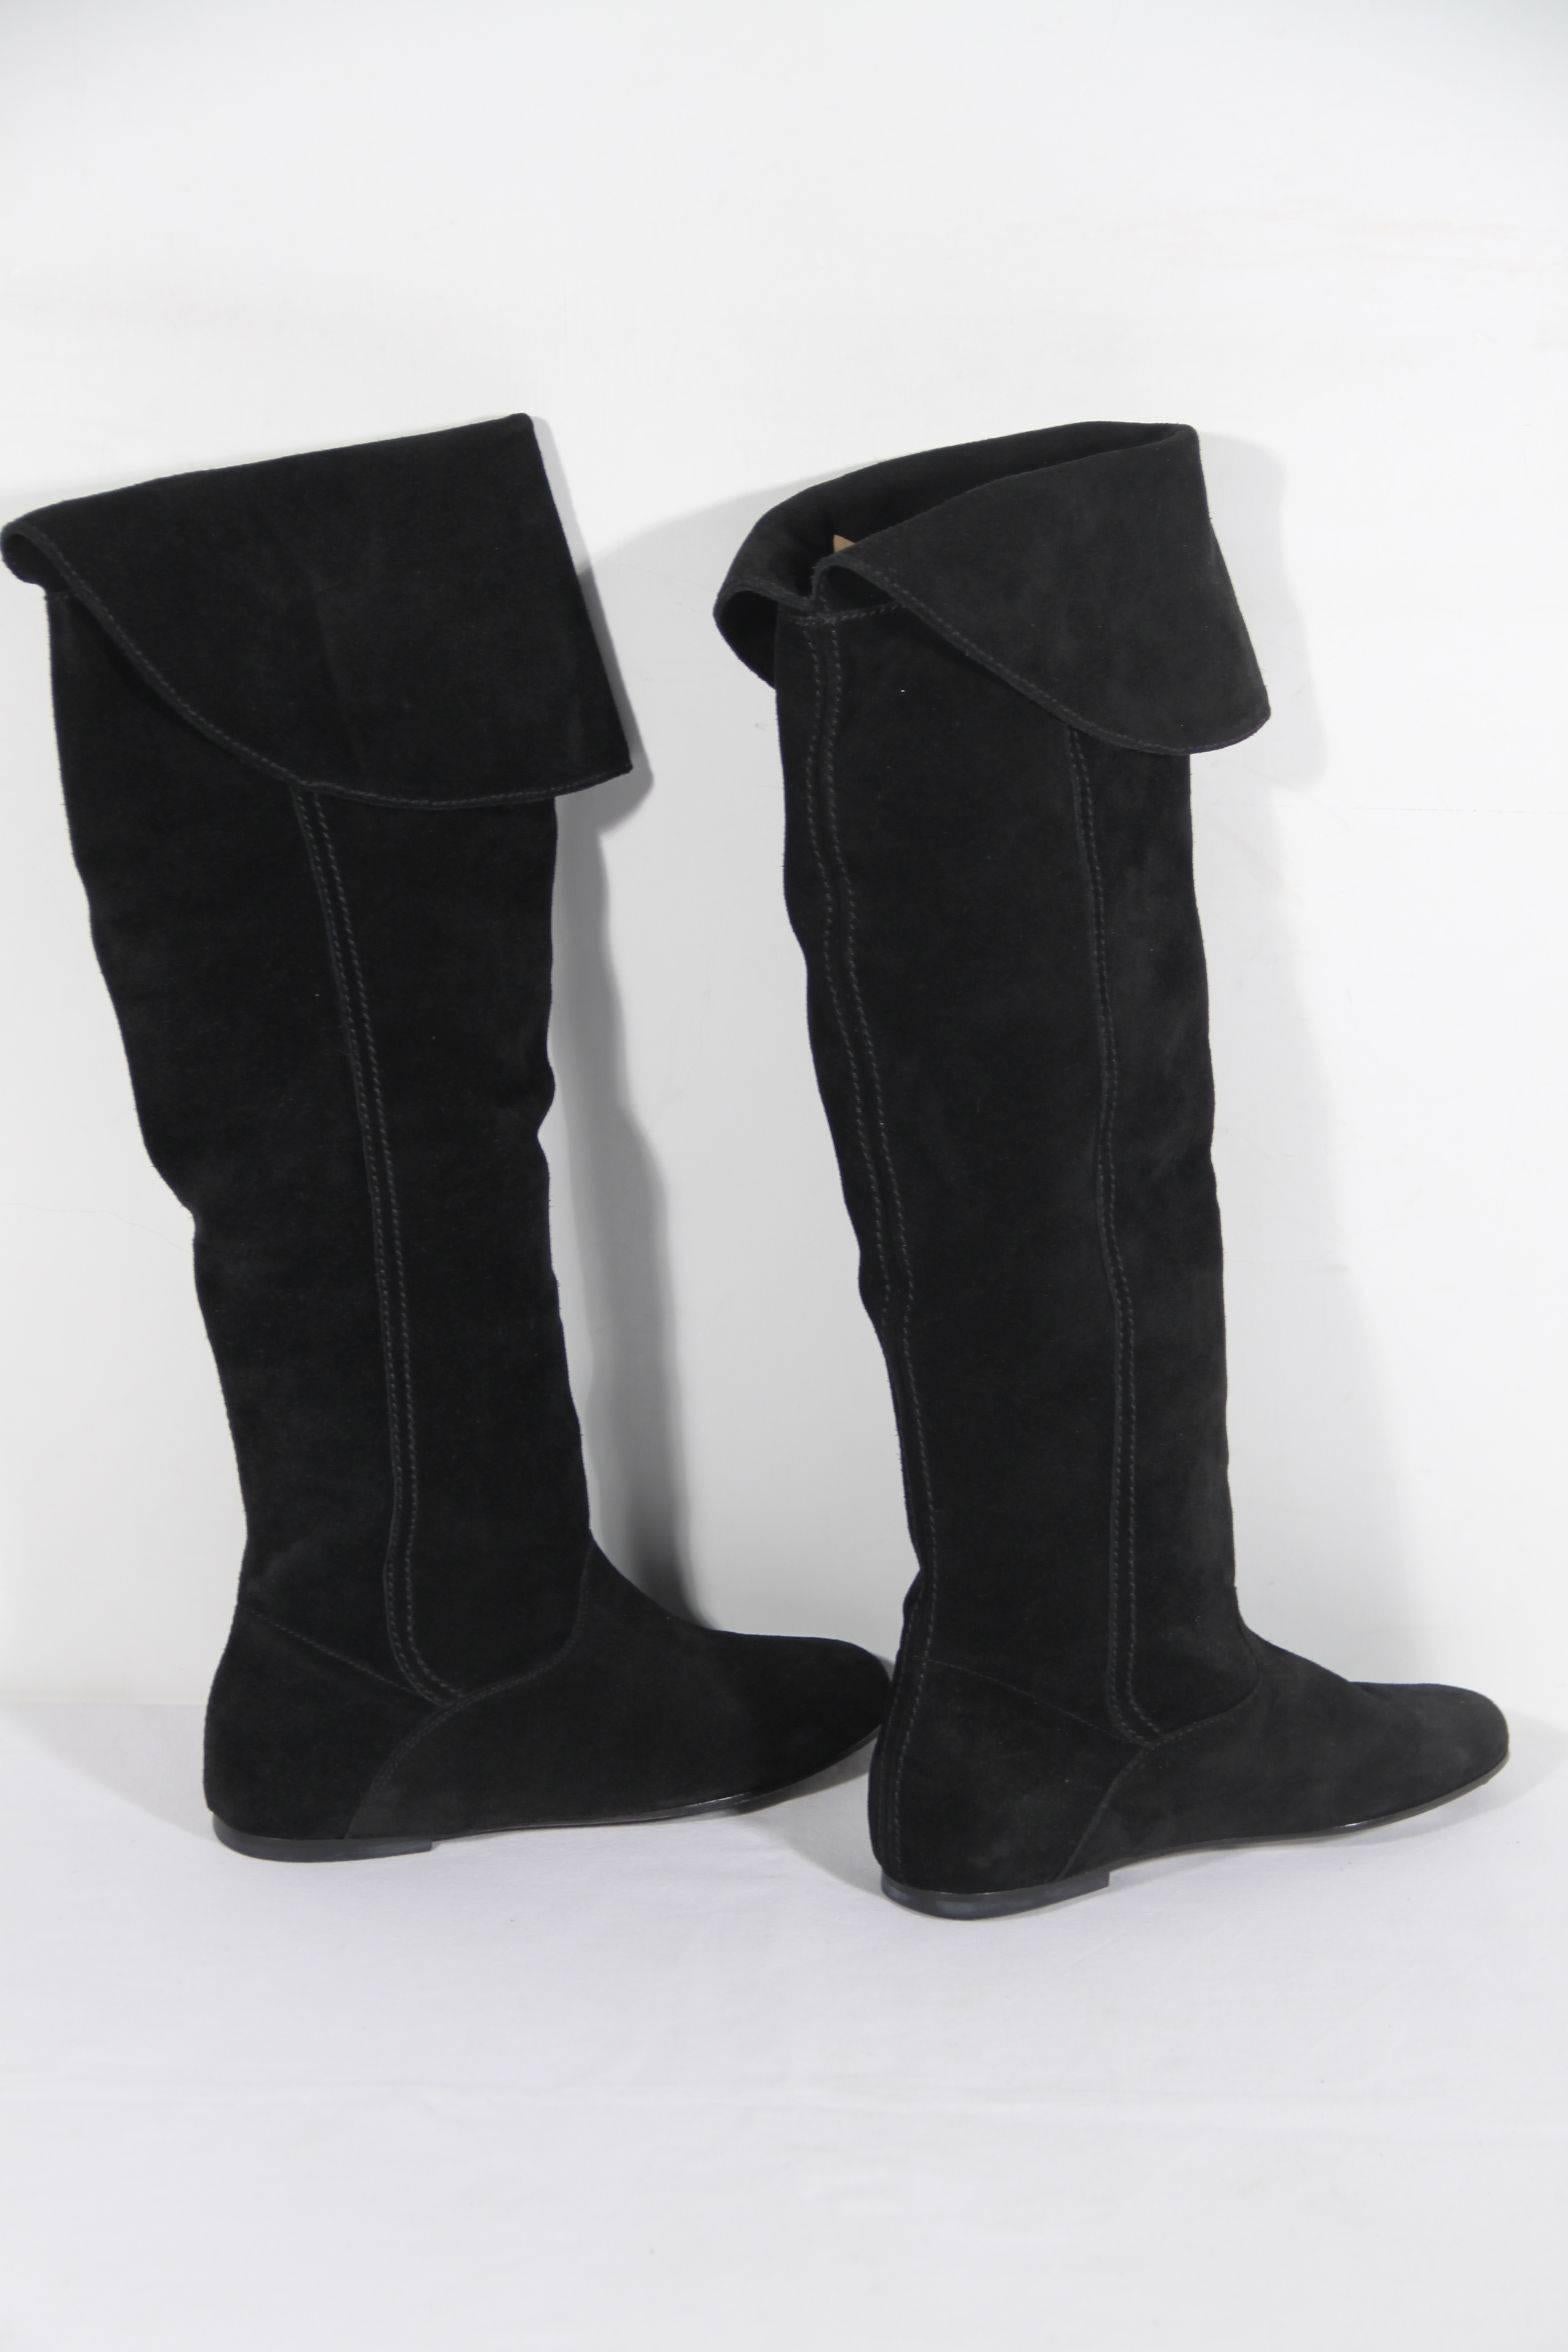 WEEKEND by MAX MARA Italian Black Suede FLAT Knee BOOTS Shoes SIZE 37 In Excellent Condition In Rome, Rome